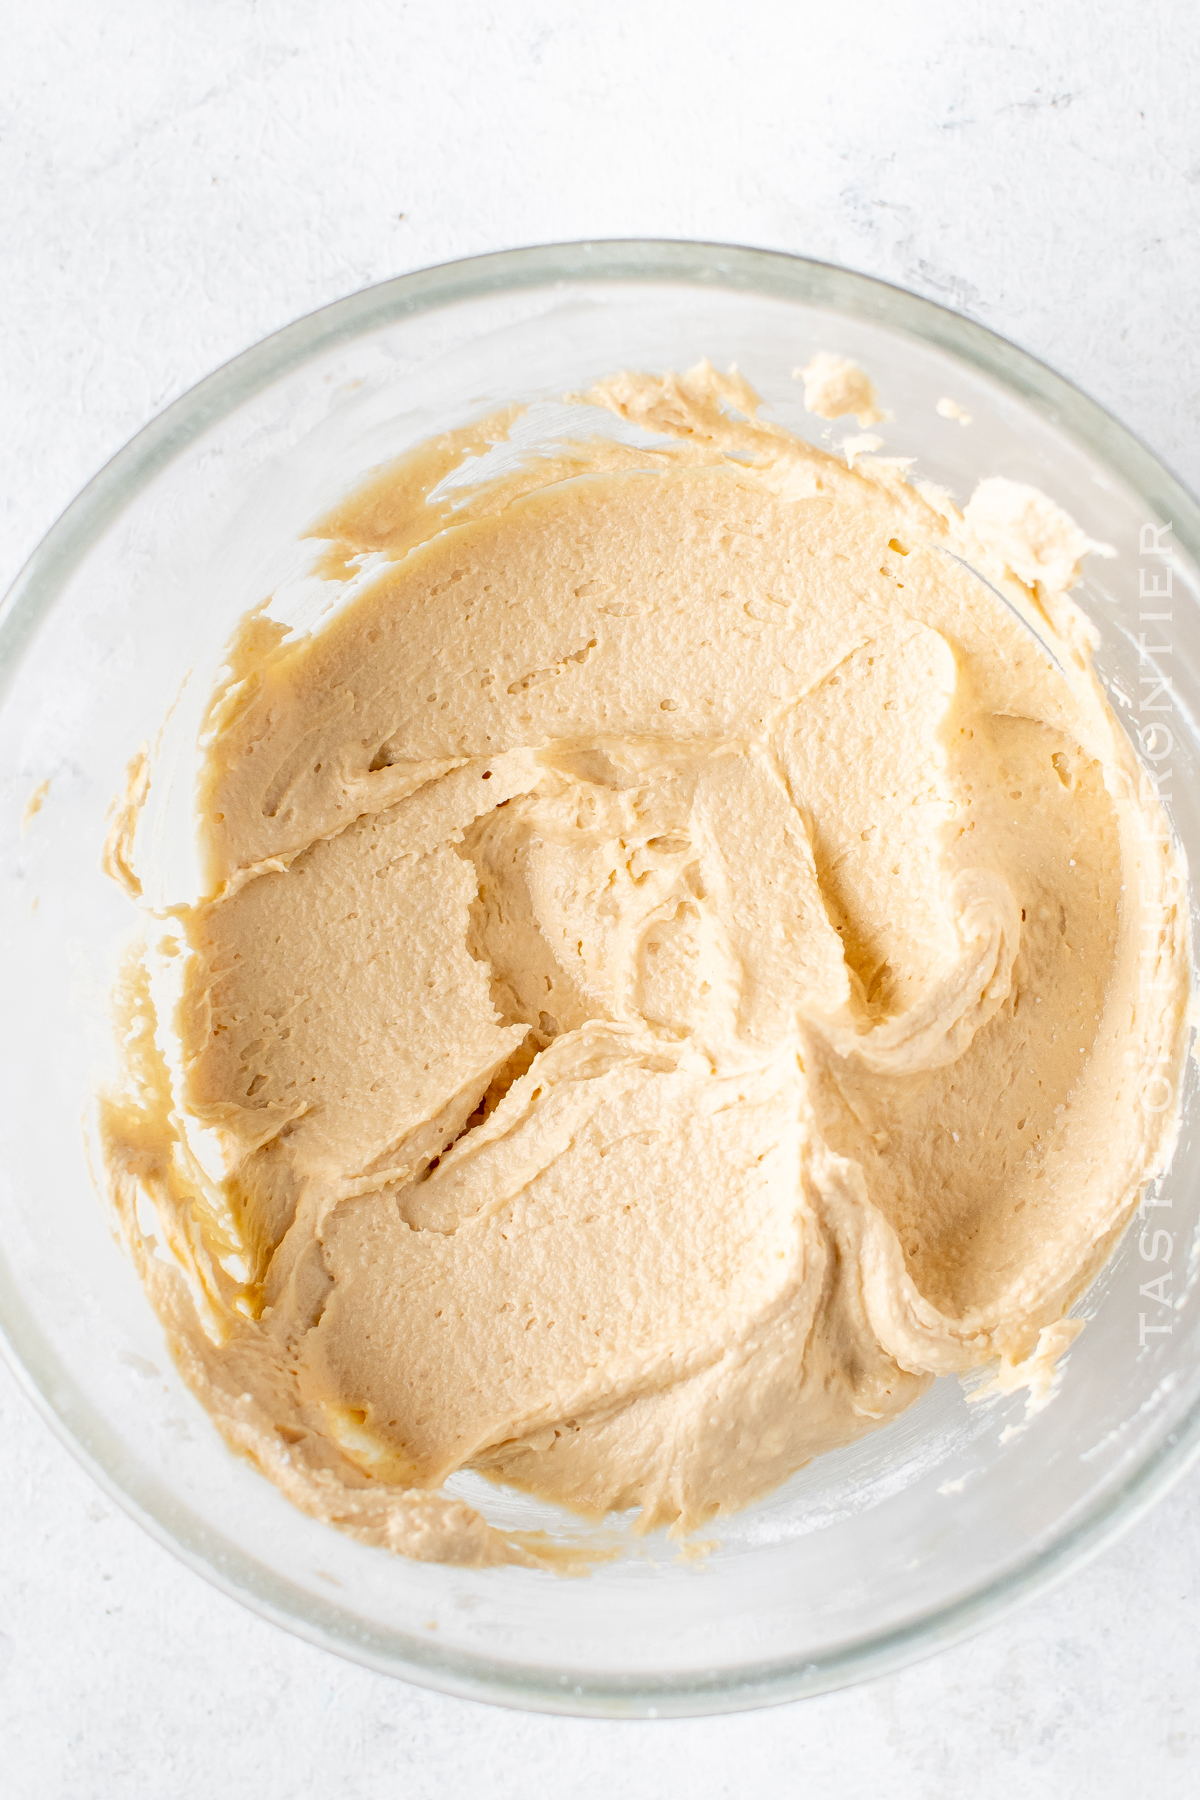 How to make caramel buttercream frosting